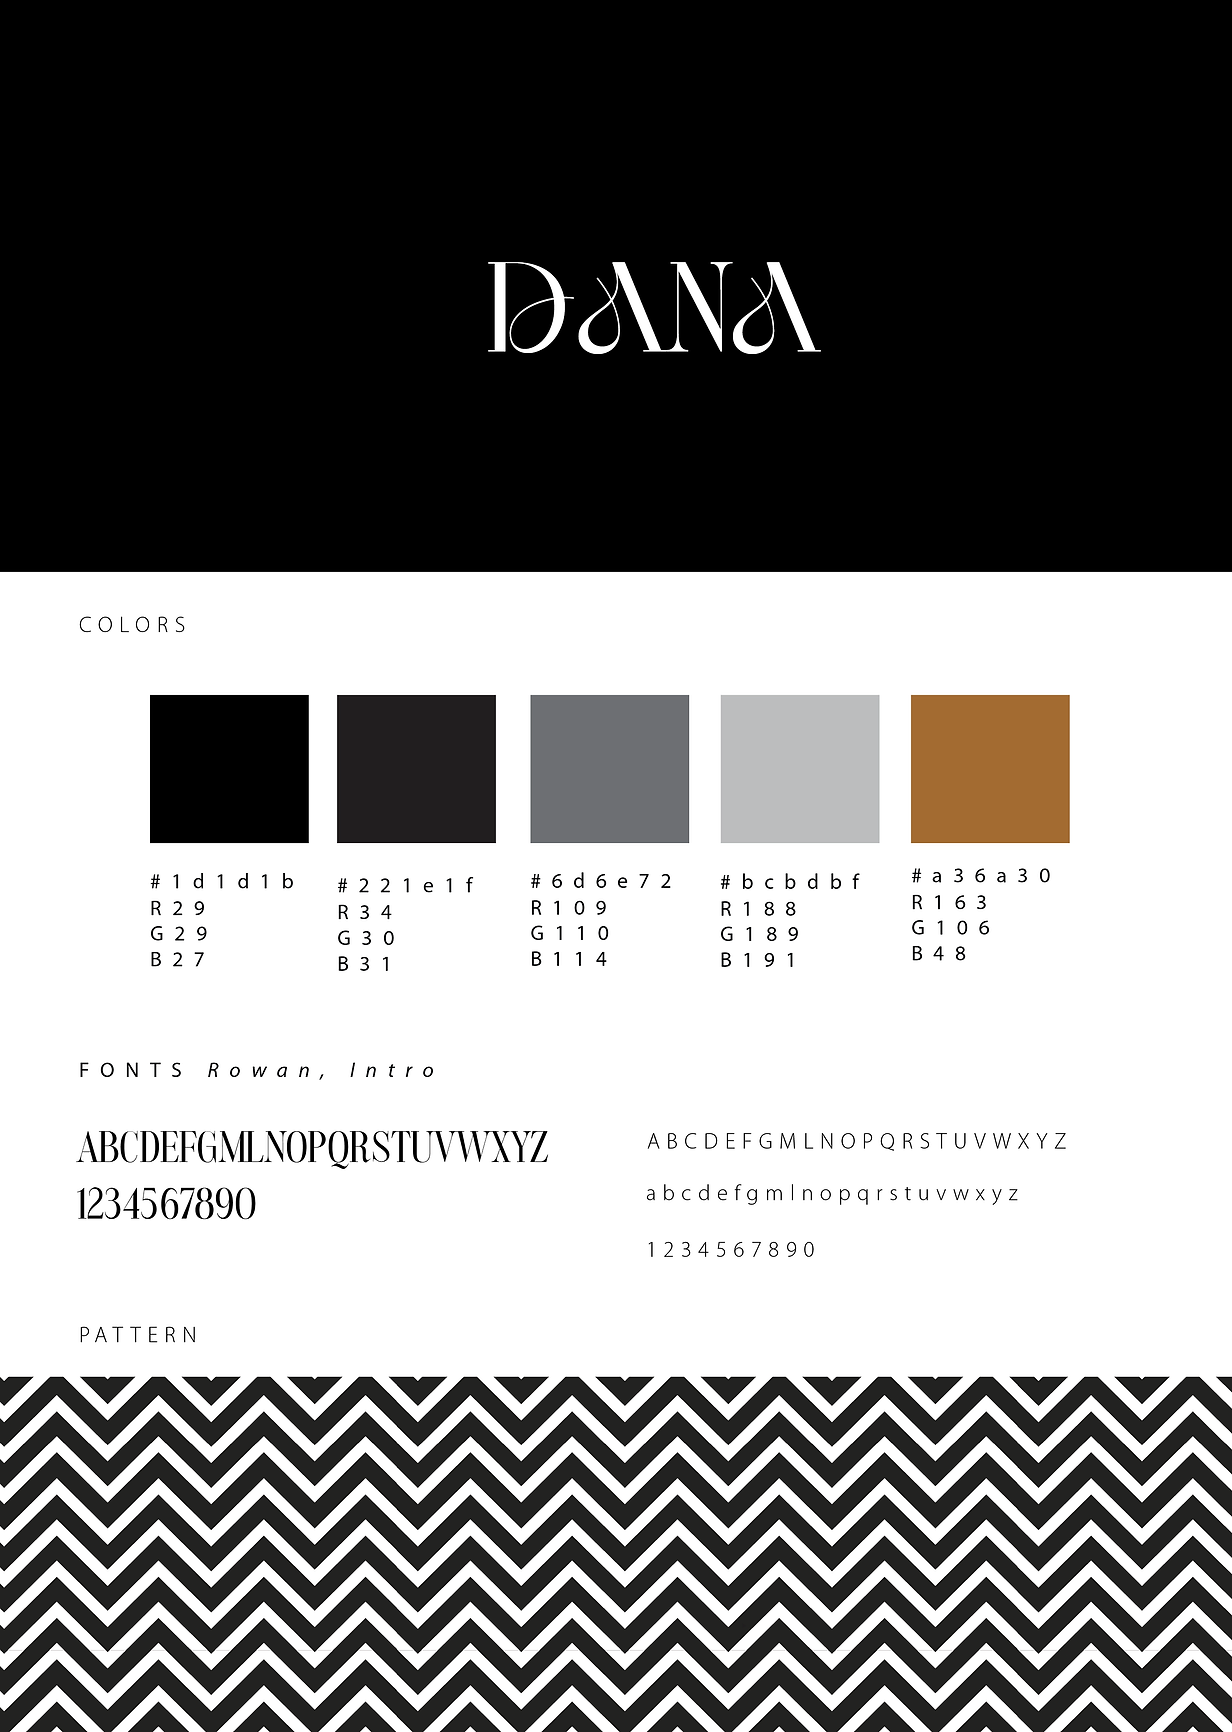 Business card and letterhead design for Dana in black and white